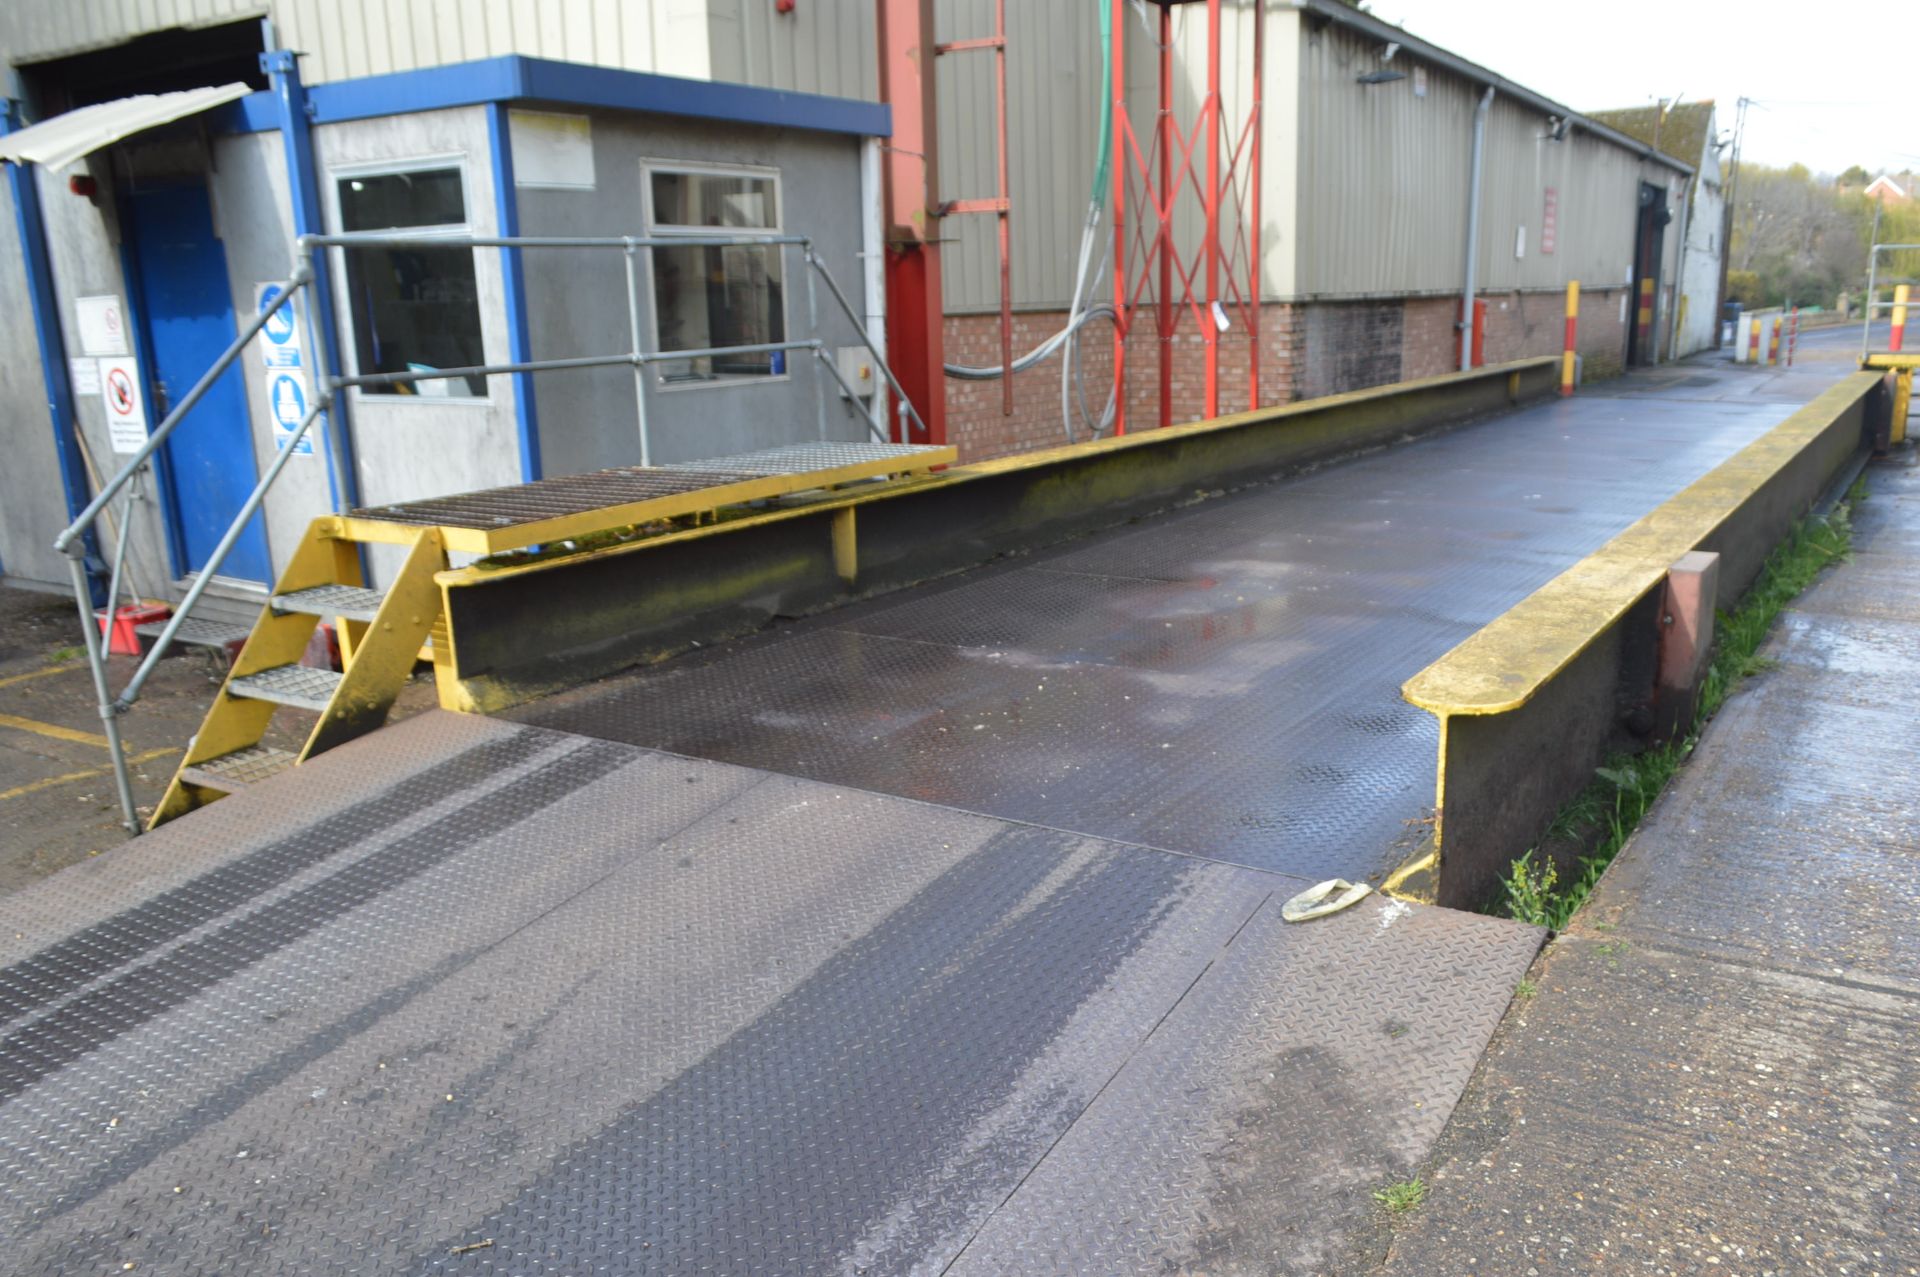 50,000kg cap. OVER SURFACE LOADCELL WEIGHBRIDGE, approx. 15m x 2.95m, with four loadcells, chequer - Image 3 of 8